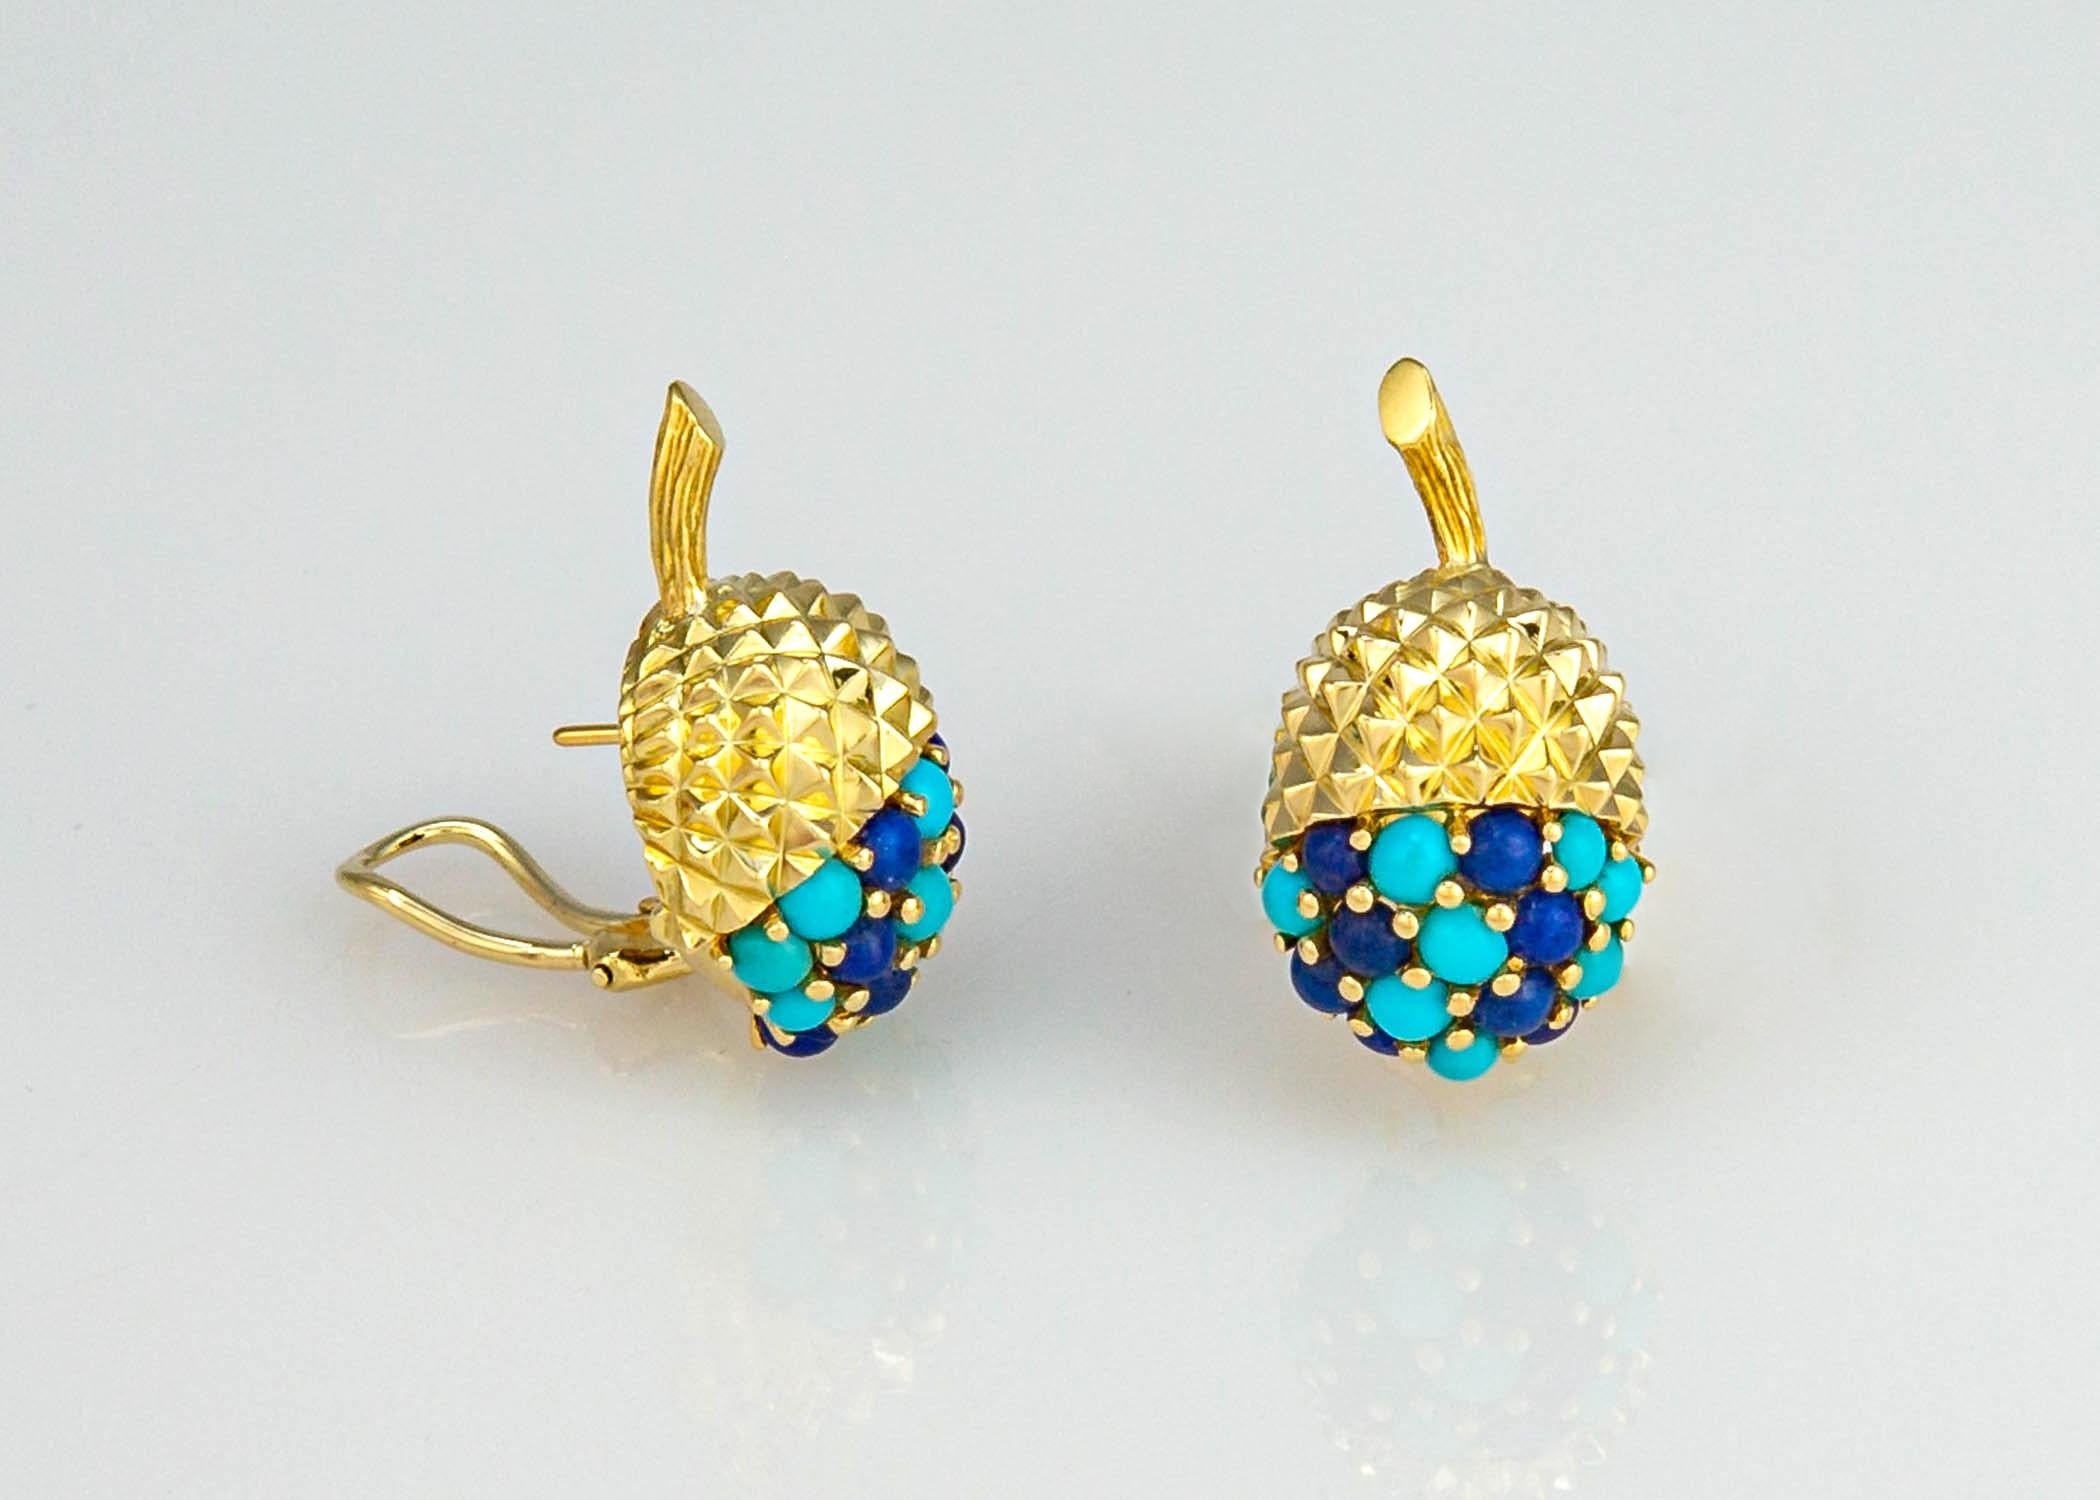 A fabulous example of vintage Tiffany & Co. designs. This acorn motif design has great detailed gold work and a chic color combination of turquoise and lapis. They make me smile!!! 7/8's of an inch for the acorn plus a bit more for the stem. 